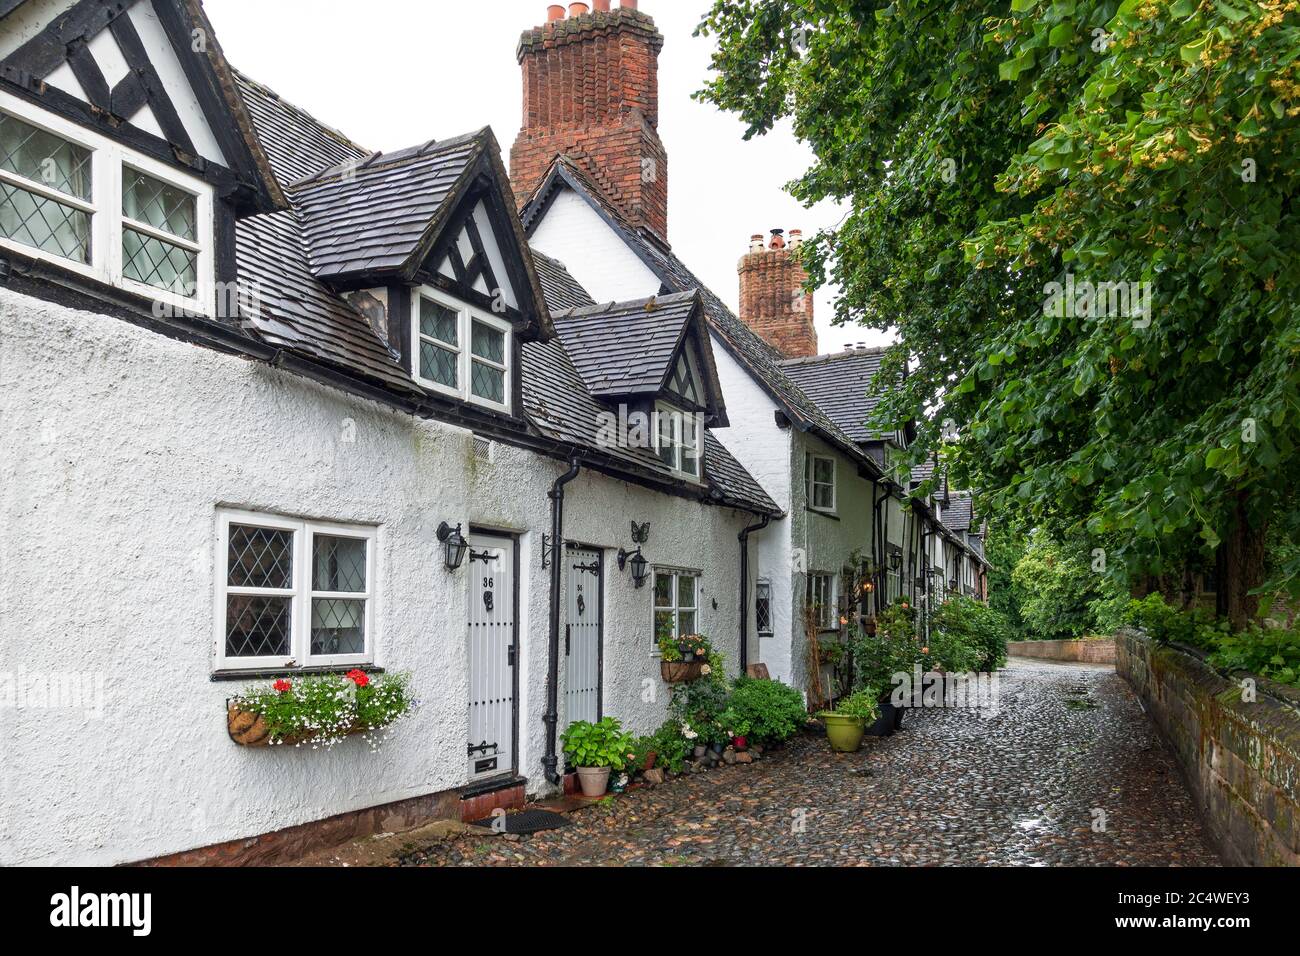 16th century grade 11 listed homes in the village of great budworth in cheshire, england Stock Photo